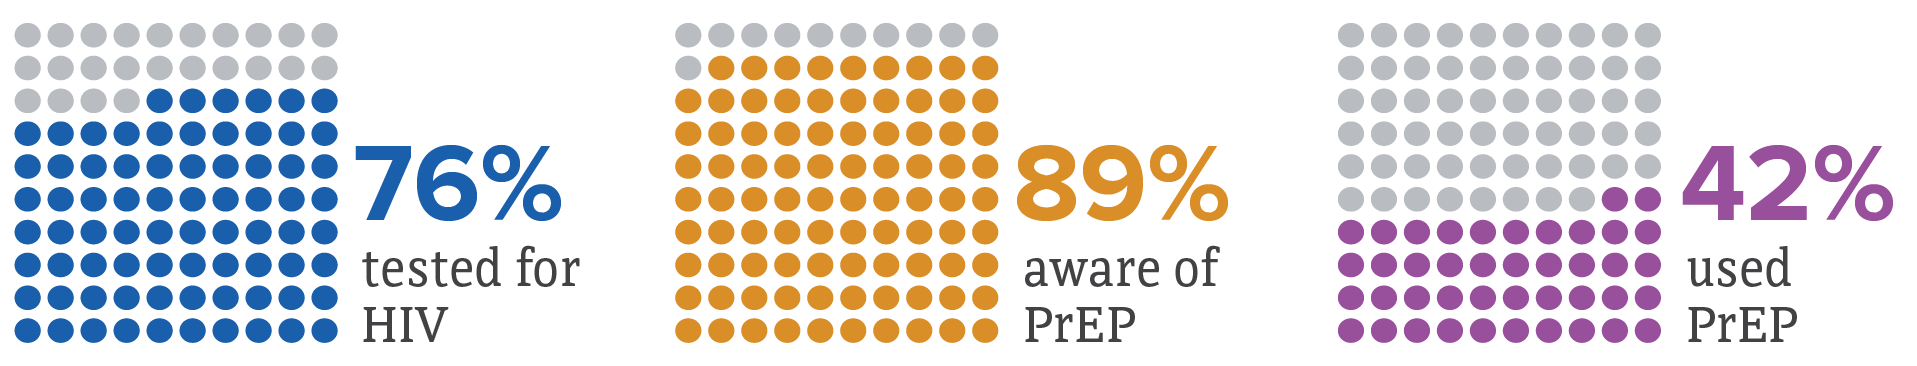 Grid chart showing the prevalence of HIV testing (76%) and awareness (89%) and use (42%) of pre-exposure prophylaxis among men who have sex with men.